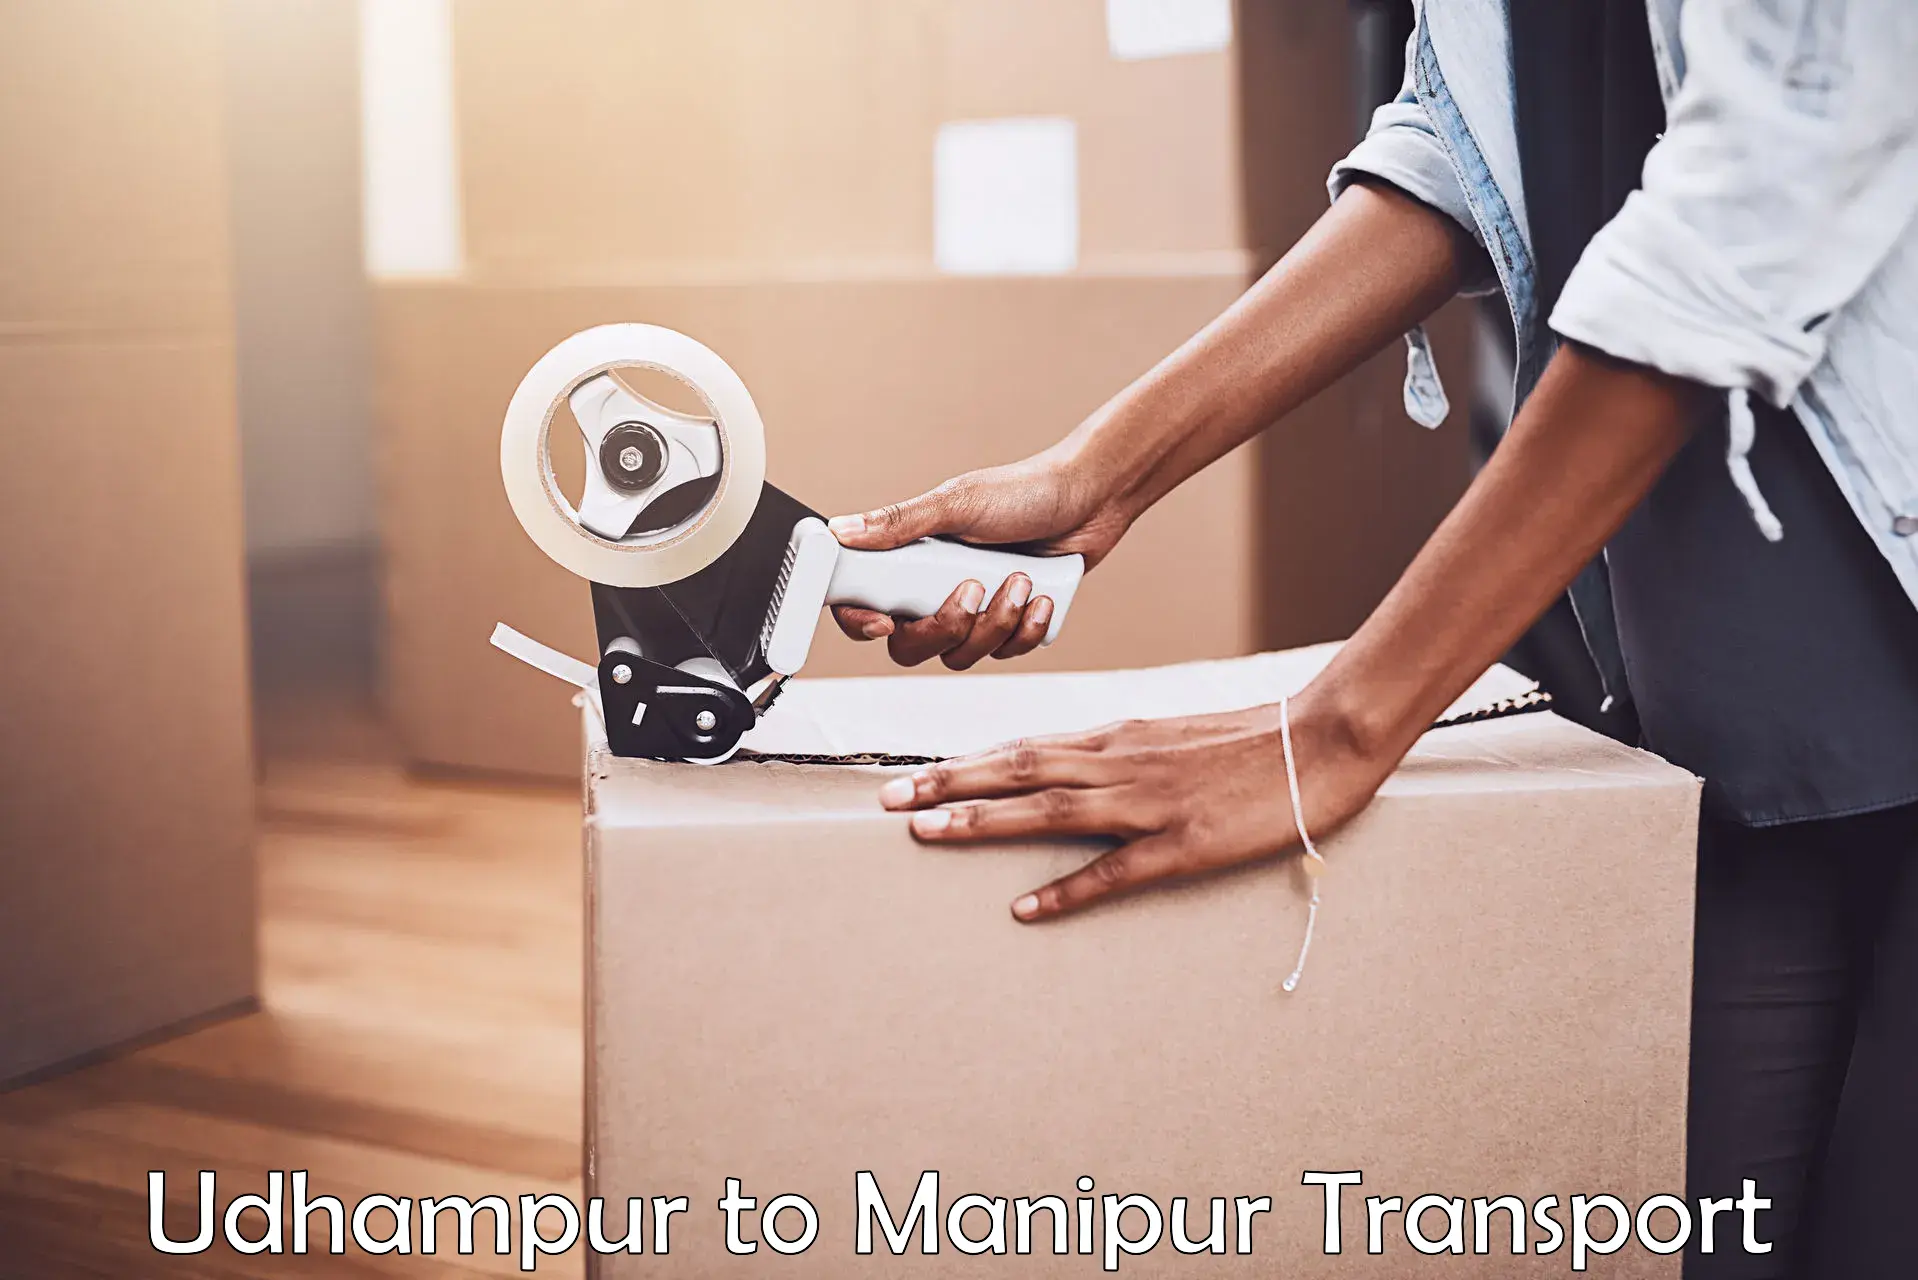 Truck transport companies in India Udhampur to Imphal